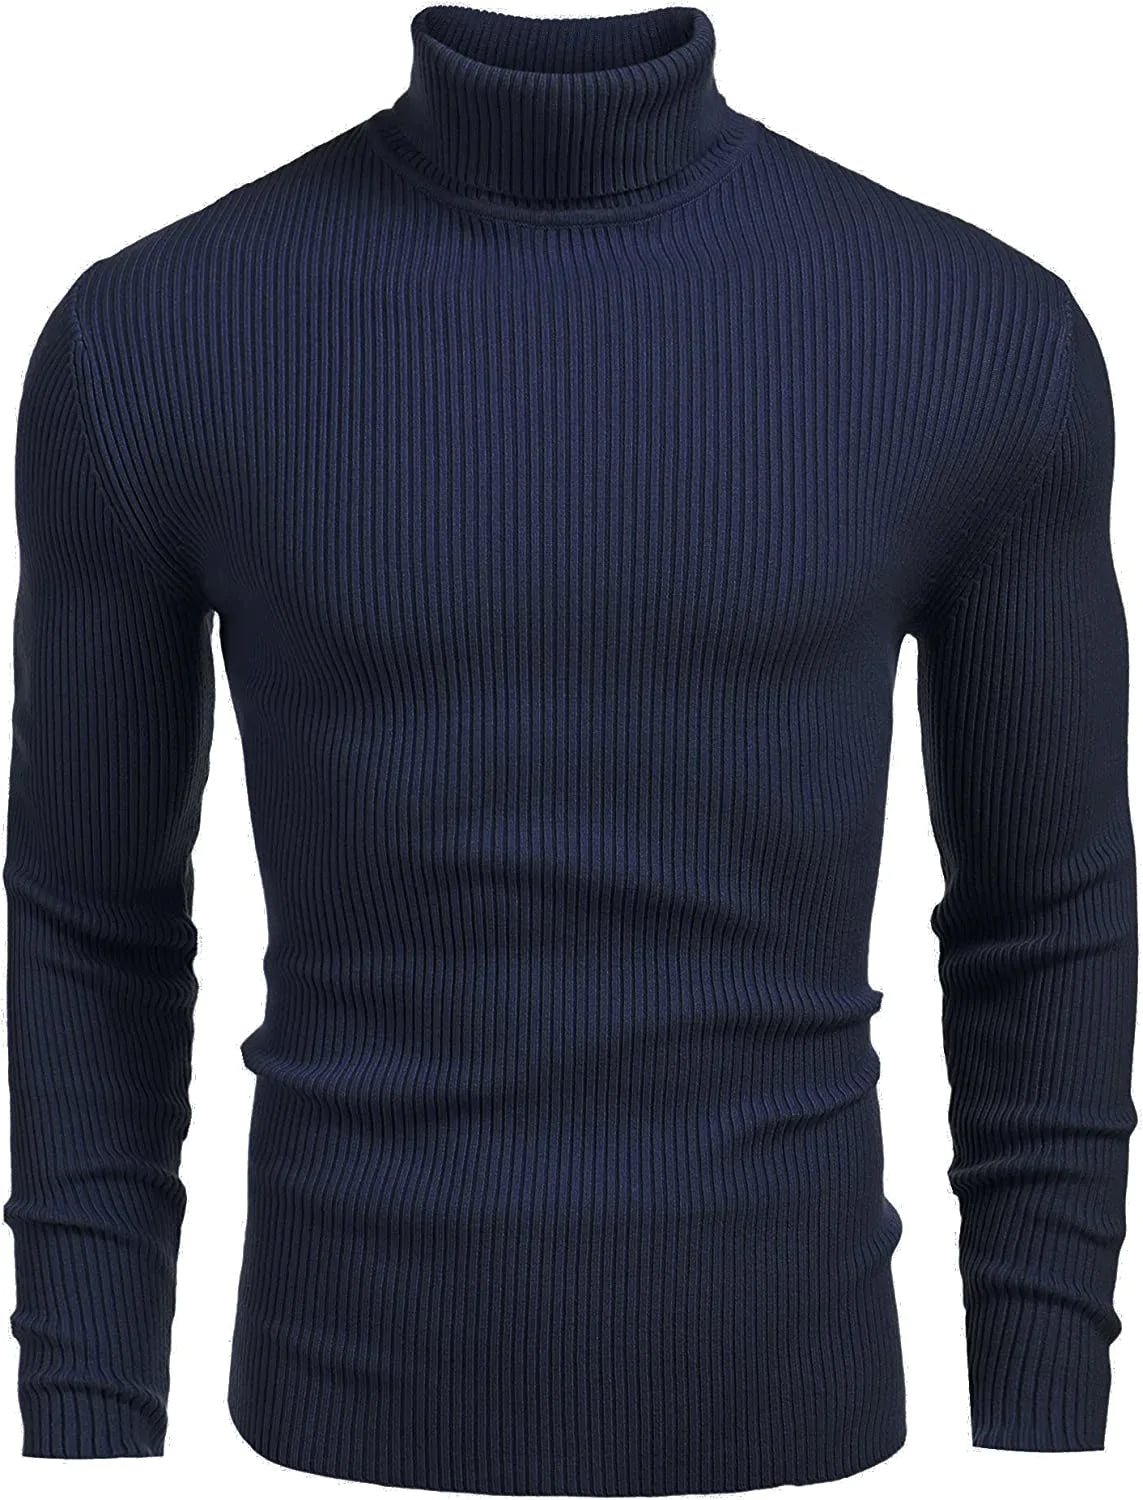 Ribbed Slim Fit Knitted Pullover Turtleneck Sweater (US Only) Sweaters COOFANDY Store Sapphire S 